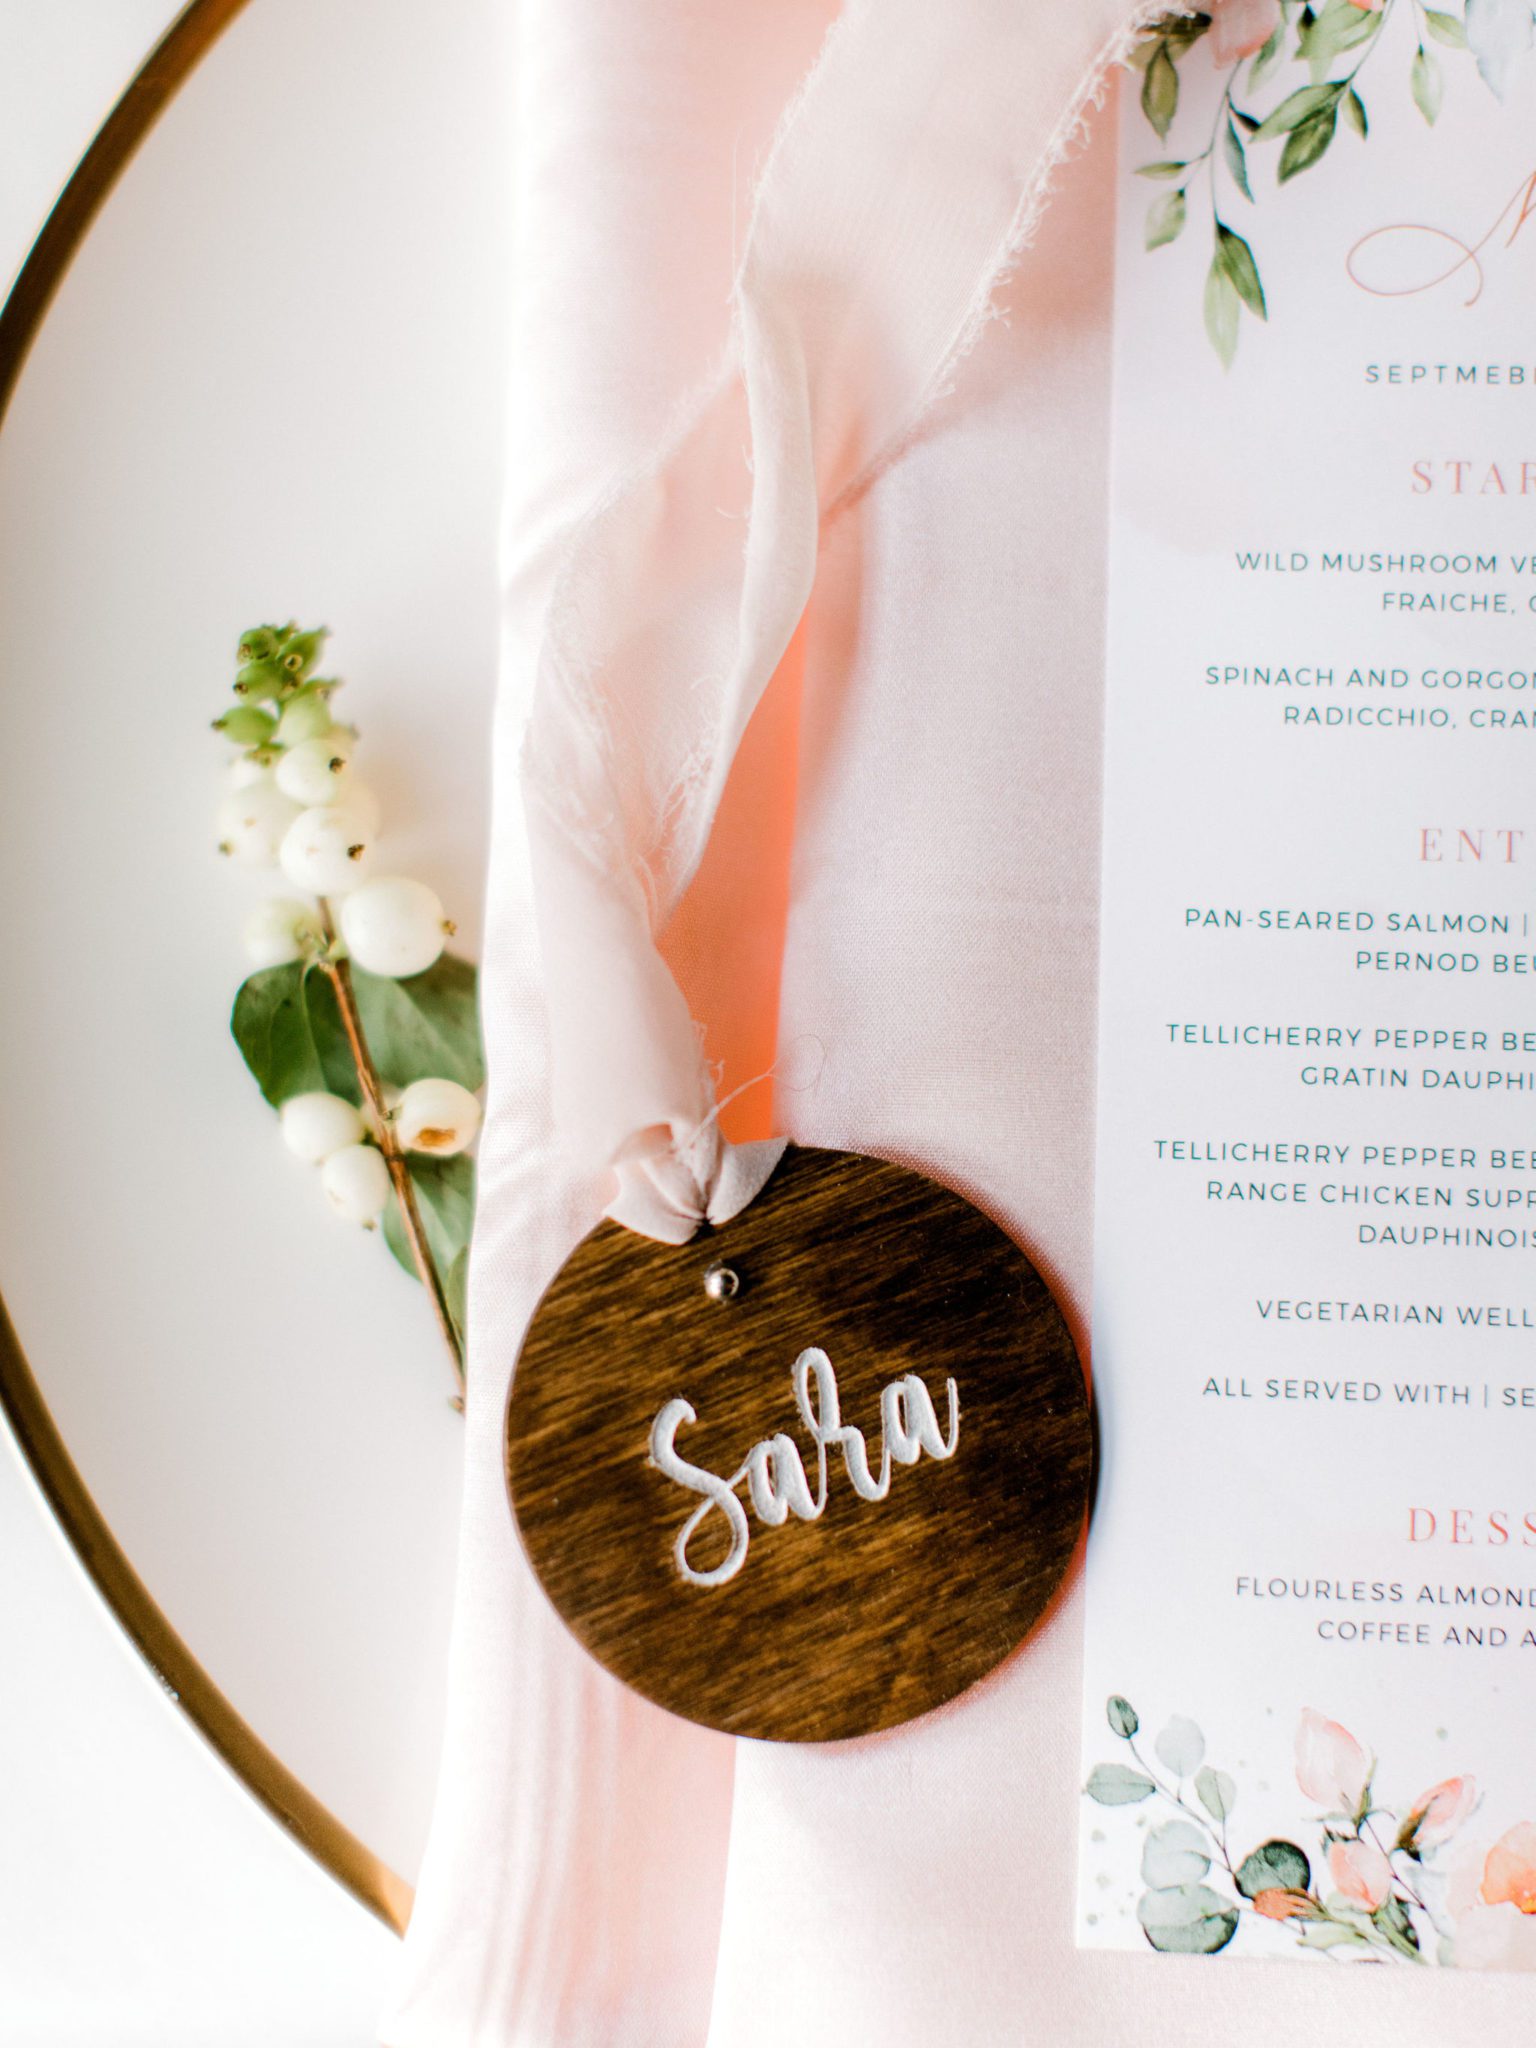 Beautiful and Unique Place Card Ideas That Will Add A Special Touch to Any Place Setting